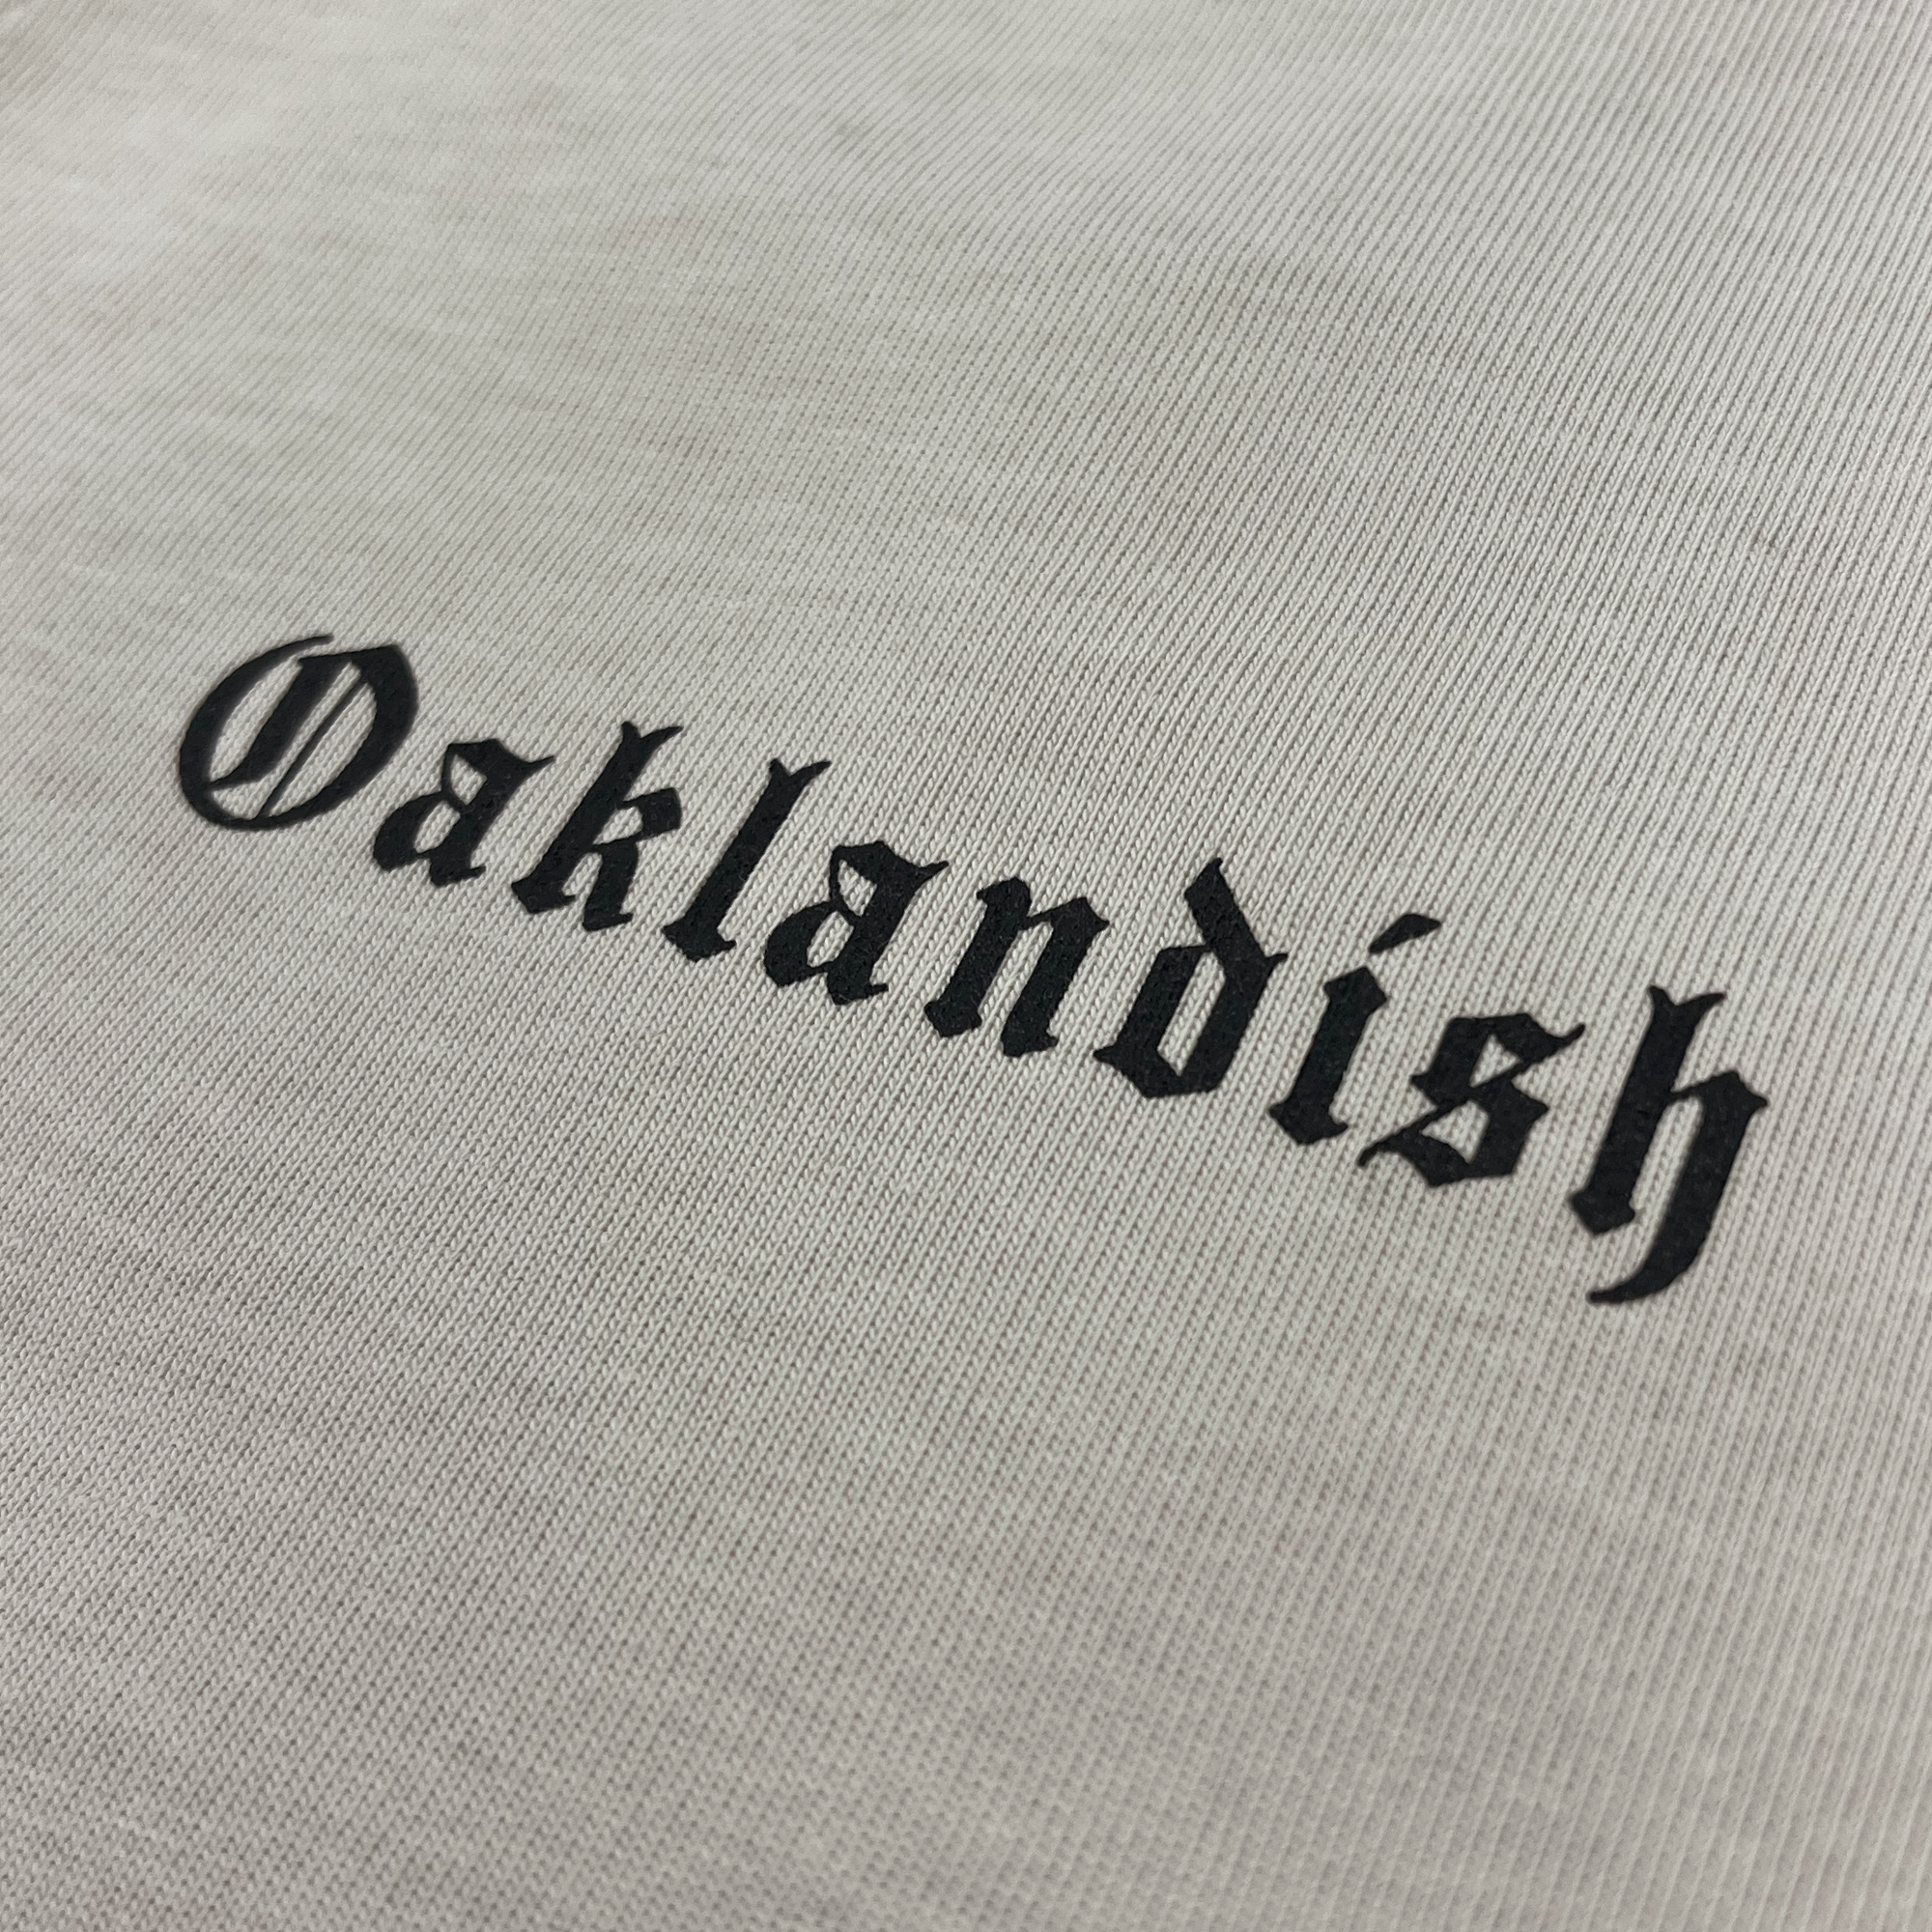 Detailed close-up of black OAKLANDISH wordmark in trip on a bone-colored baseball jersey.